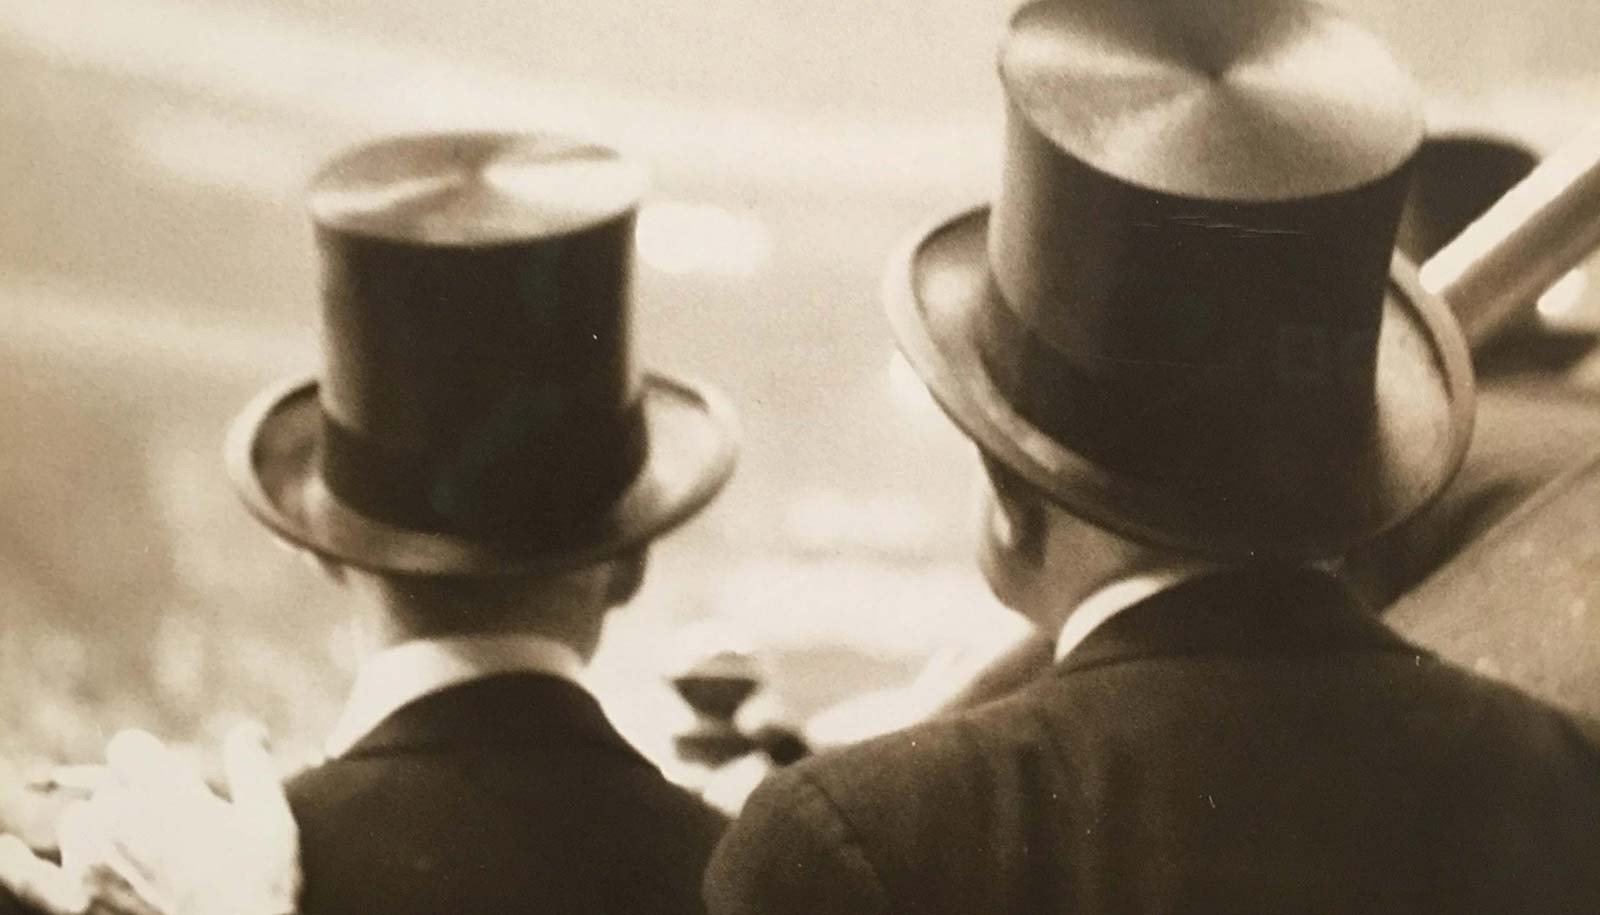 Top Hats (photo by Ted Croner) - Whitney Museum of Art